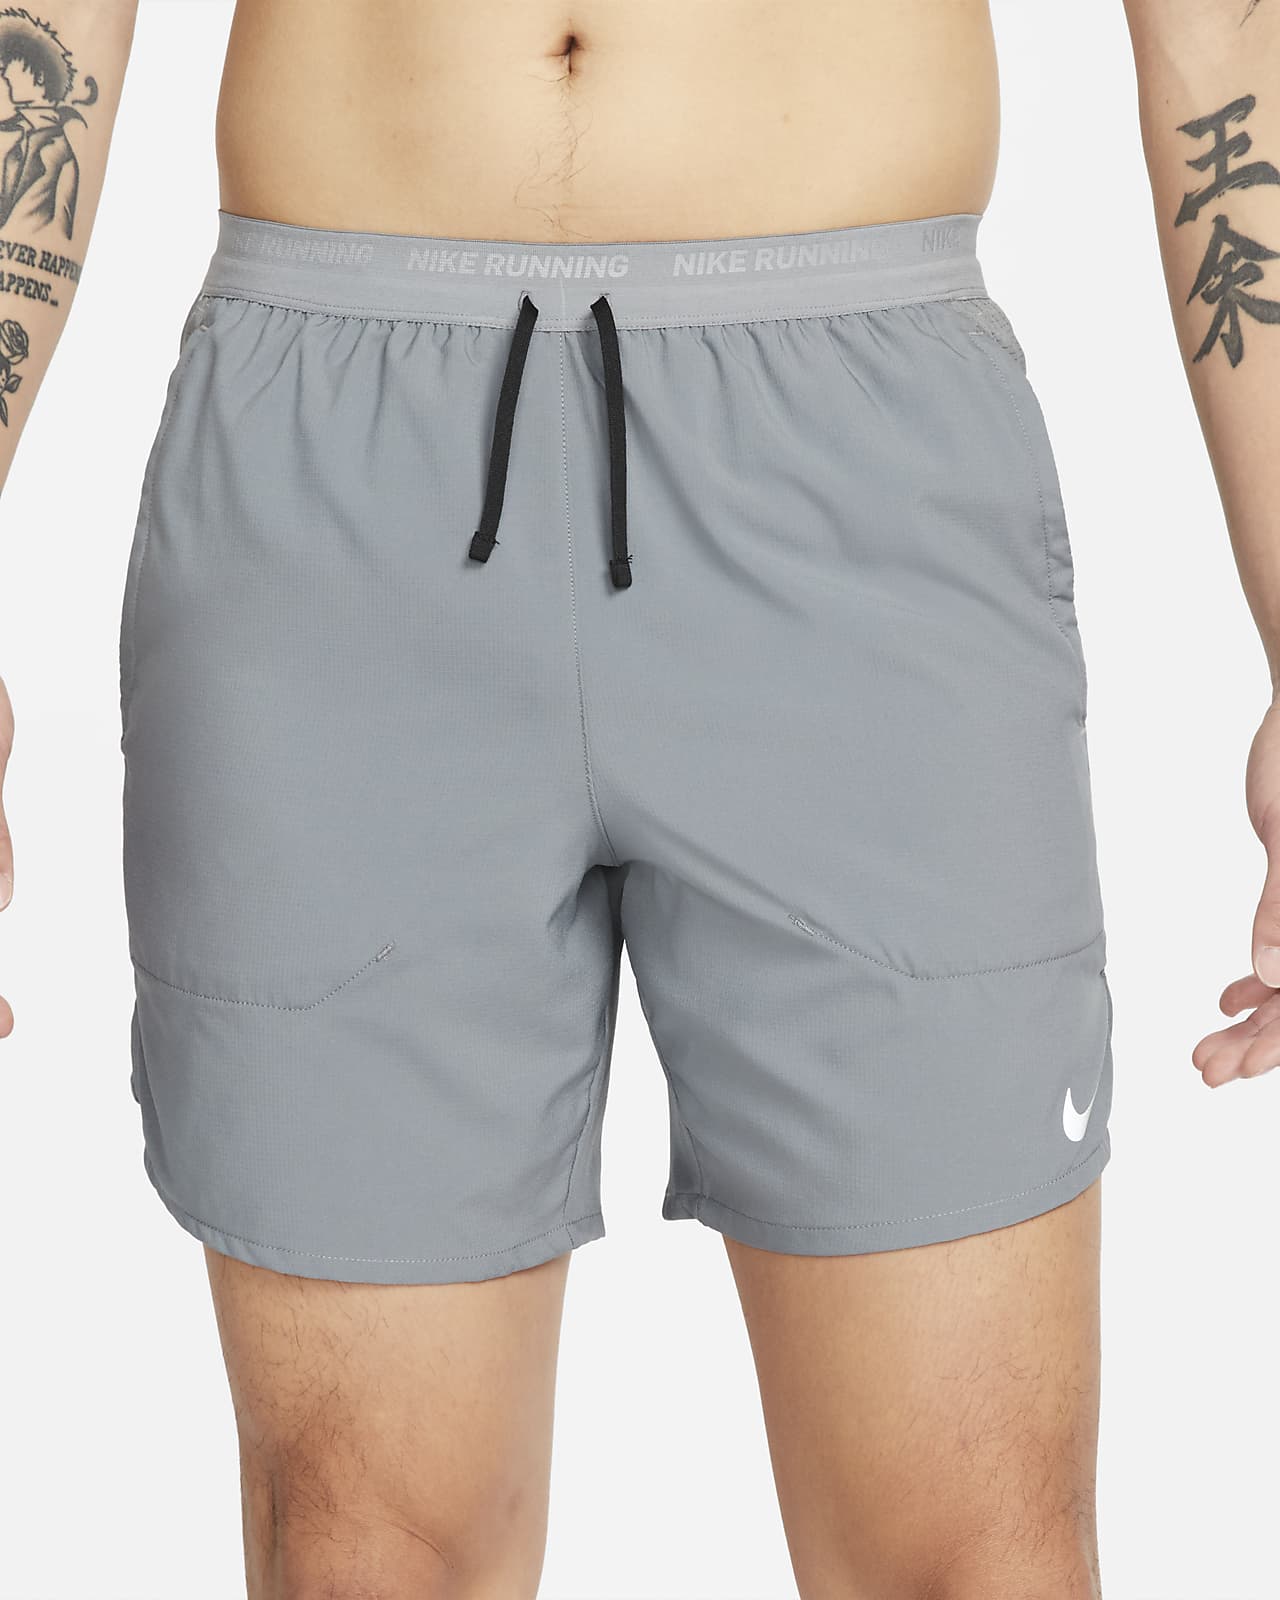 Nike Running Dri-FIT Stride 5-Inch brief-lined shorts in gray